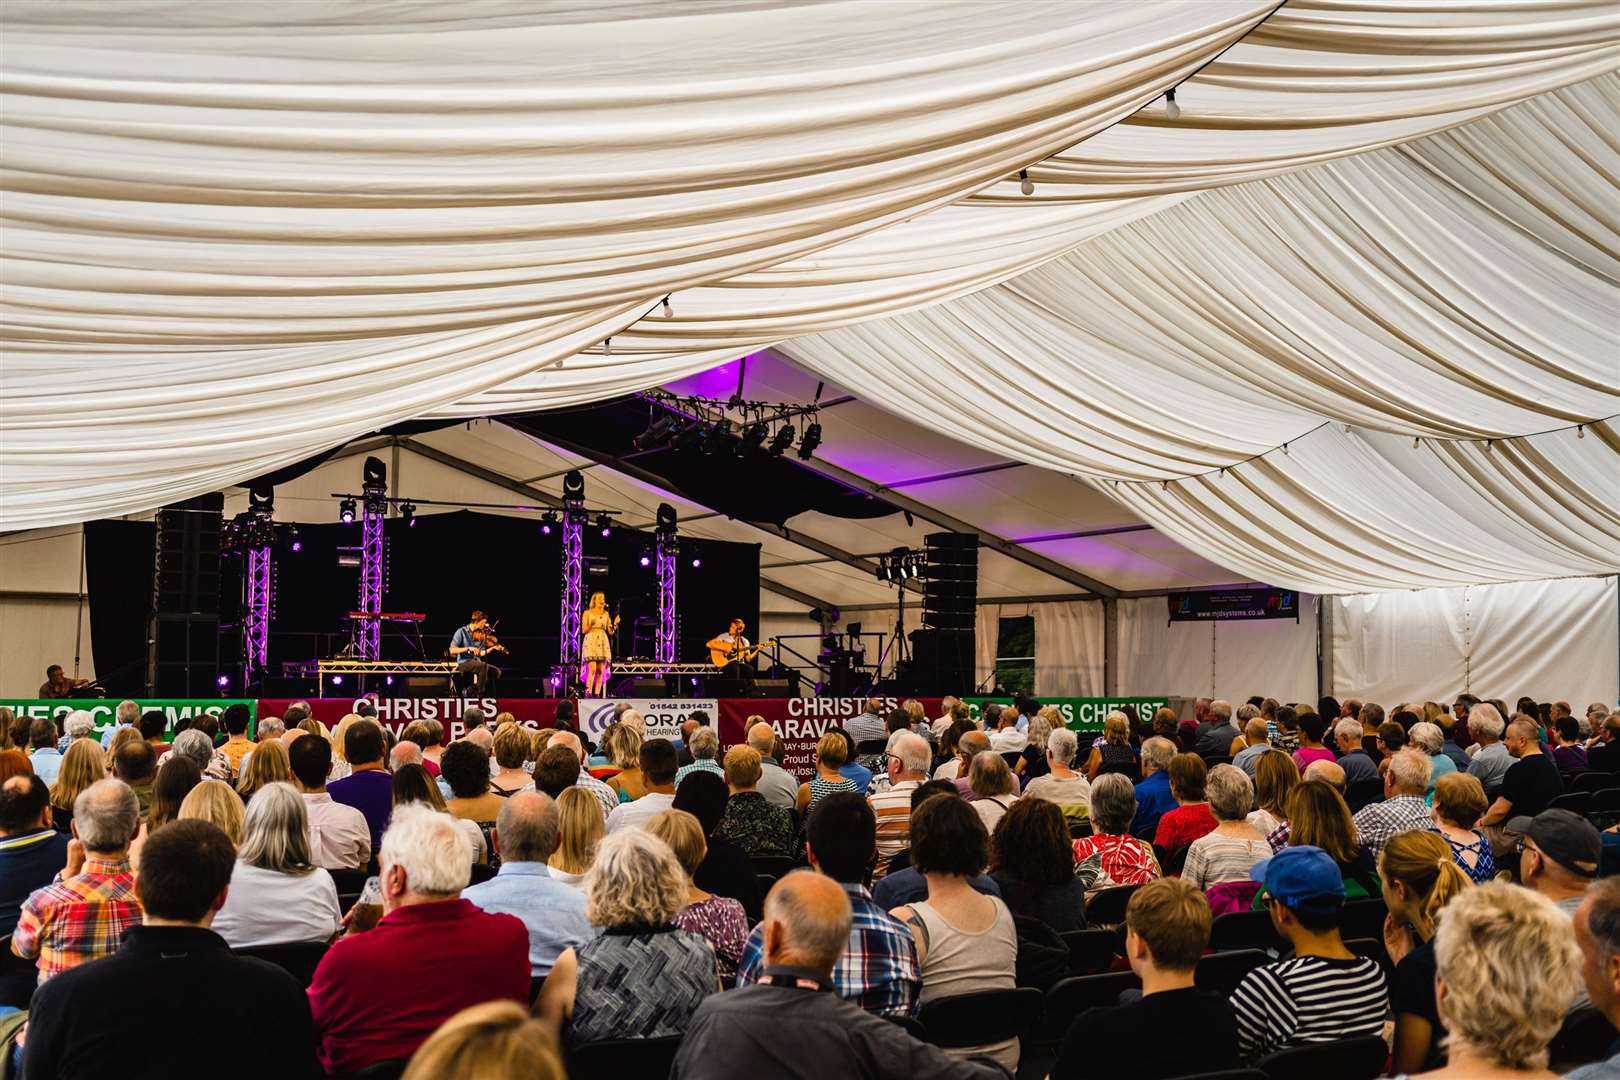 A packed programme is on offer as the festival returns.